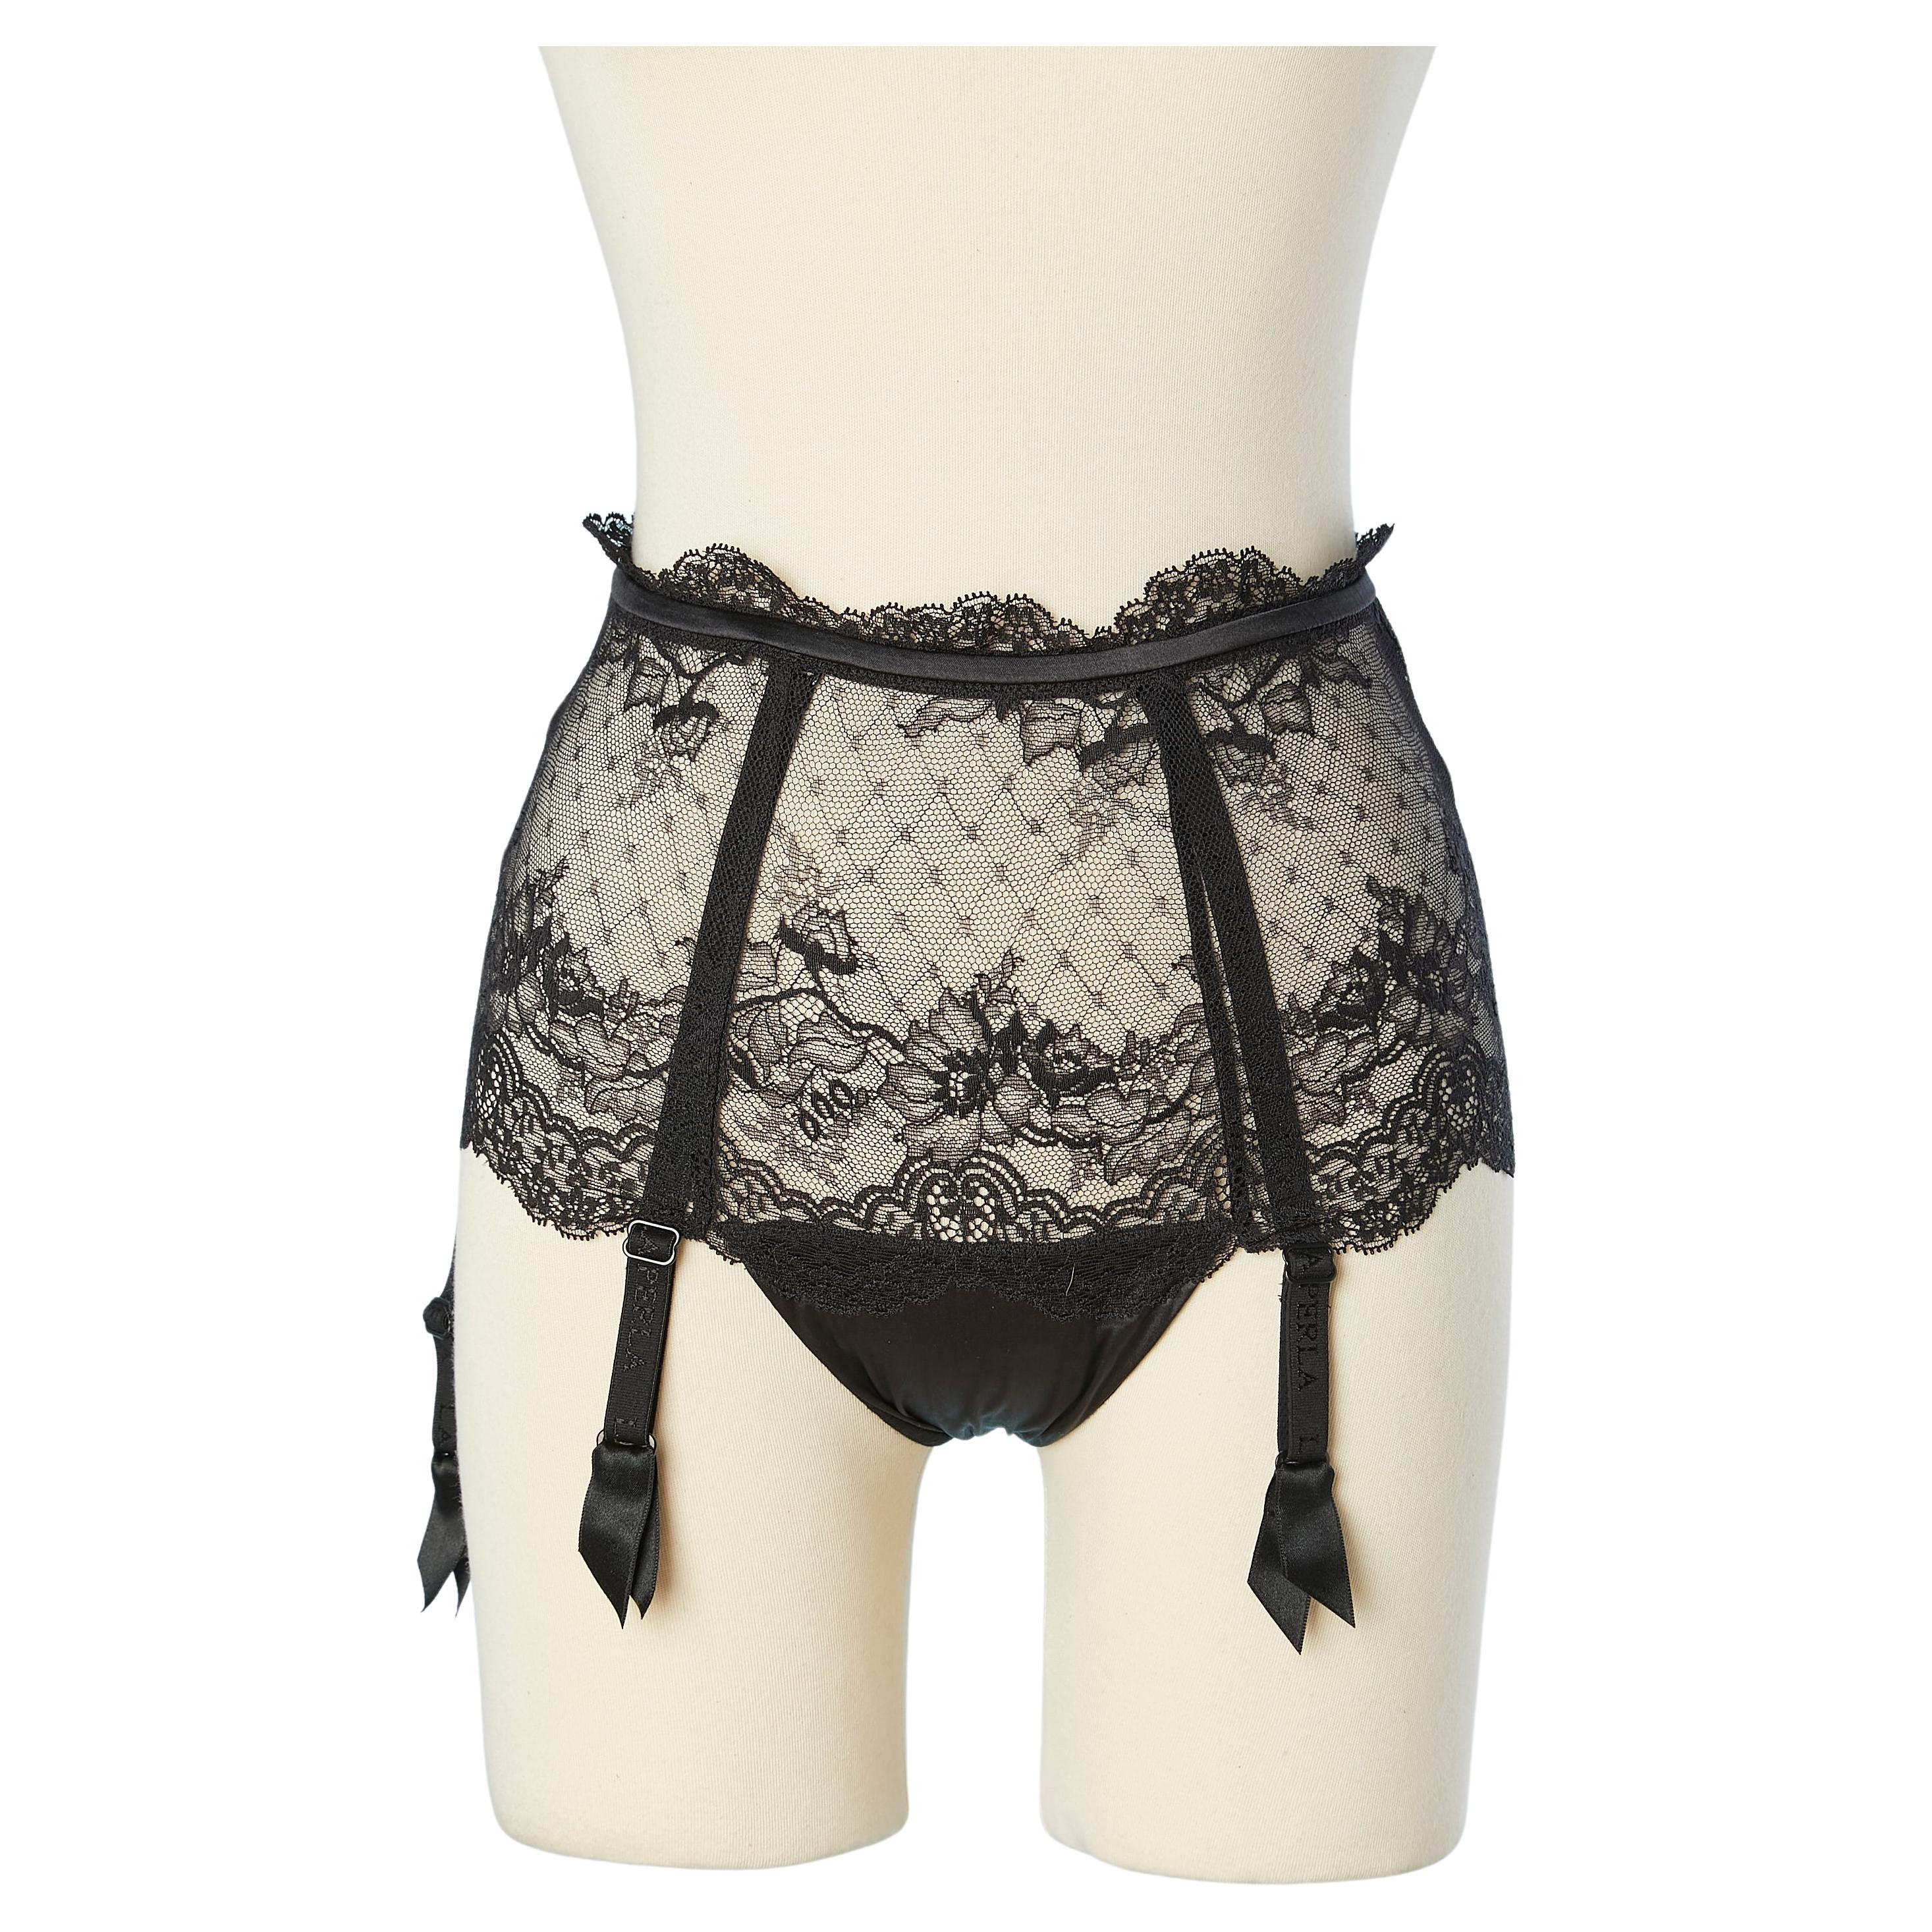 Black lace panties with garter belt and laces in the back La Perla 